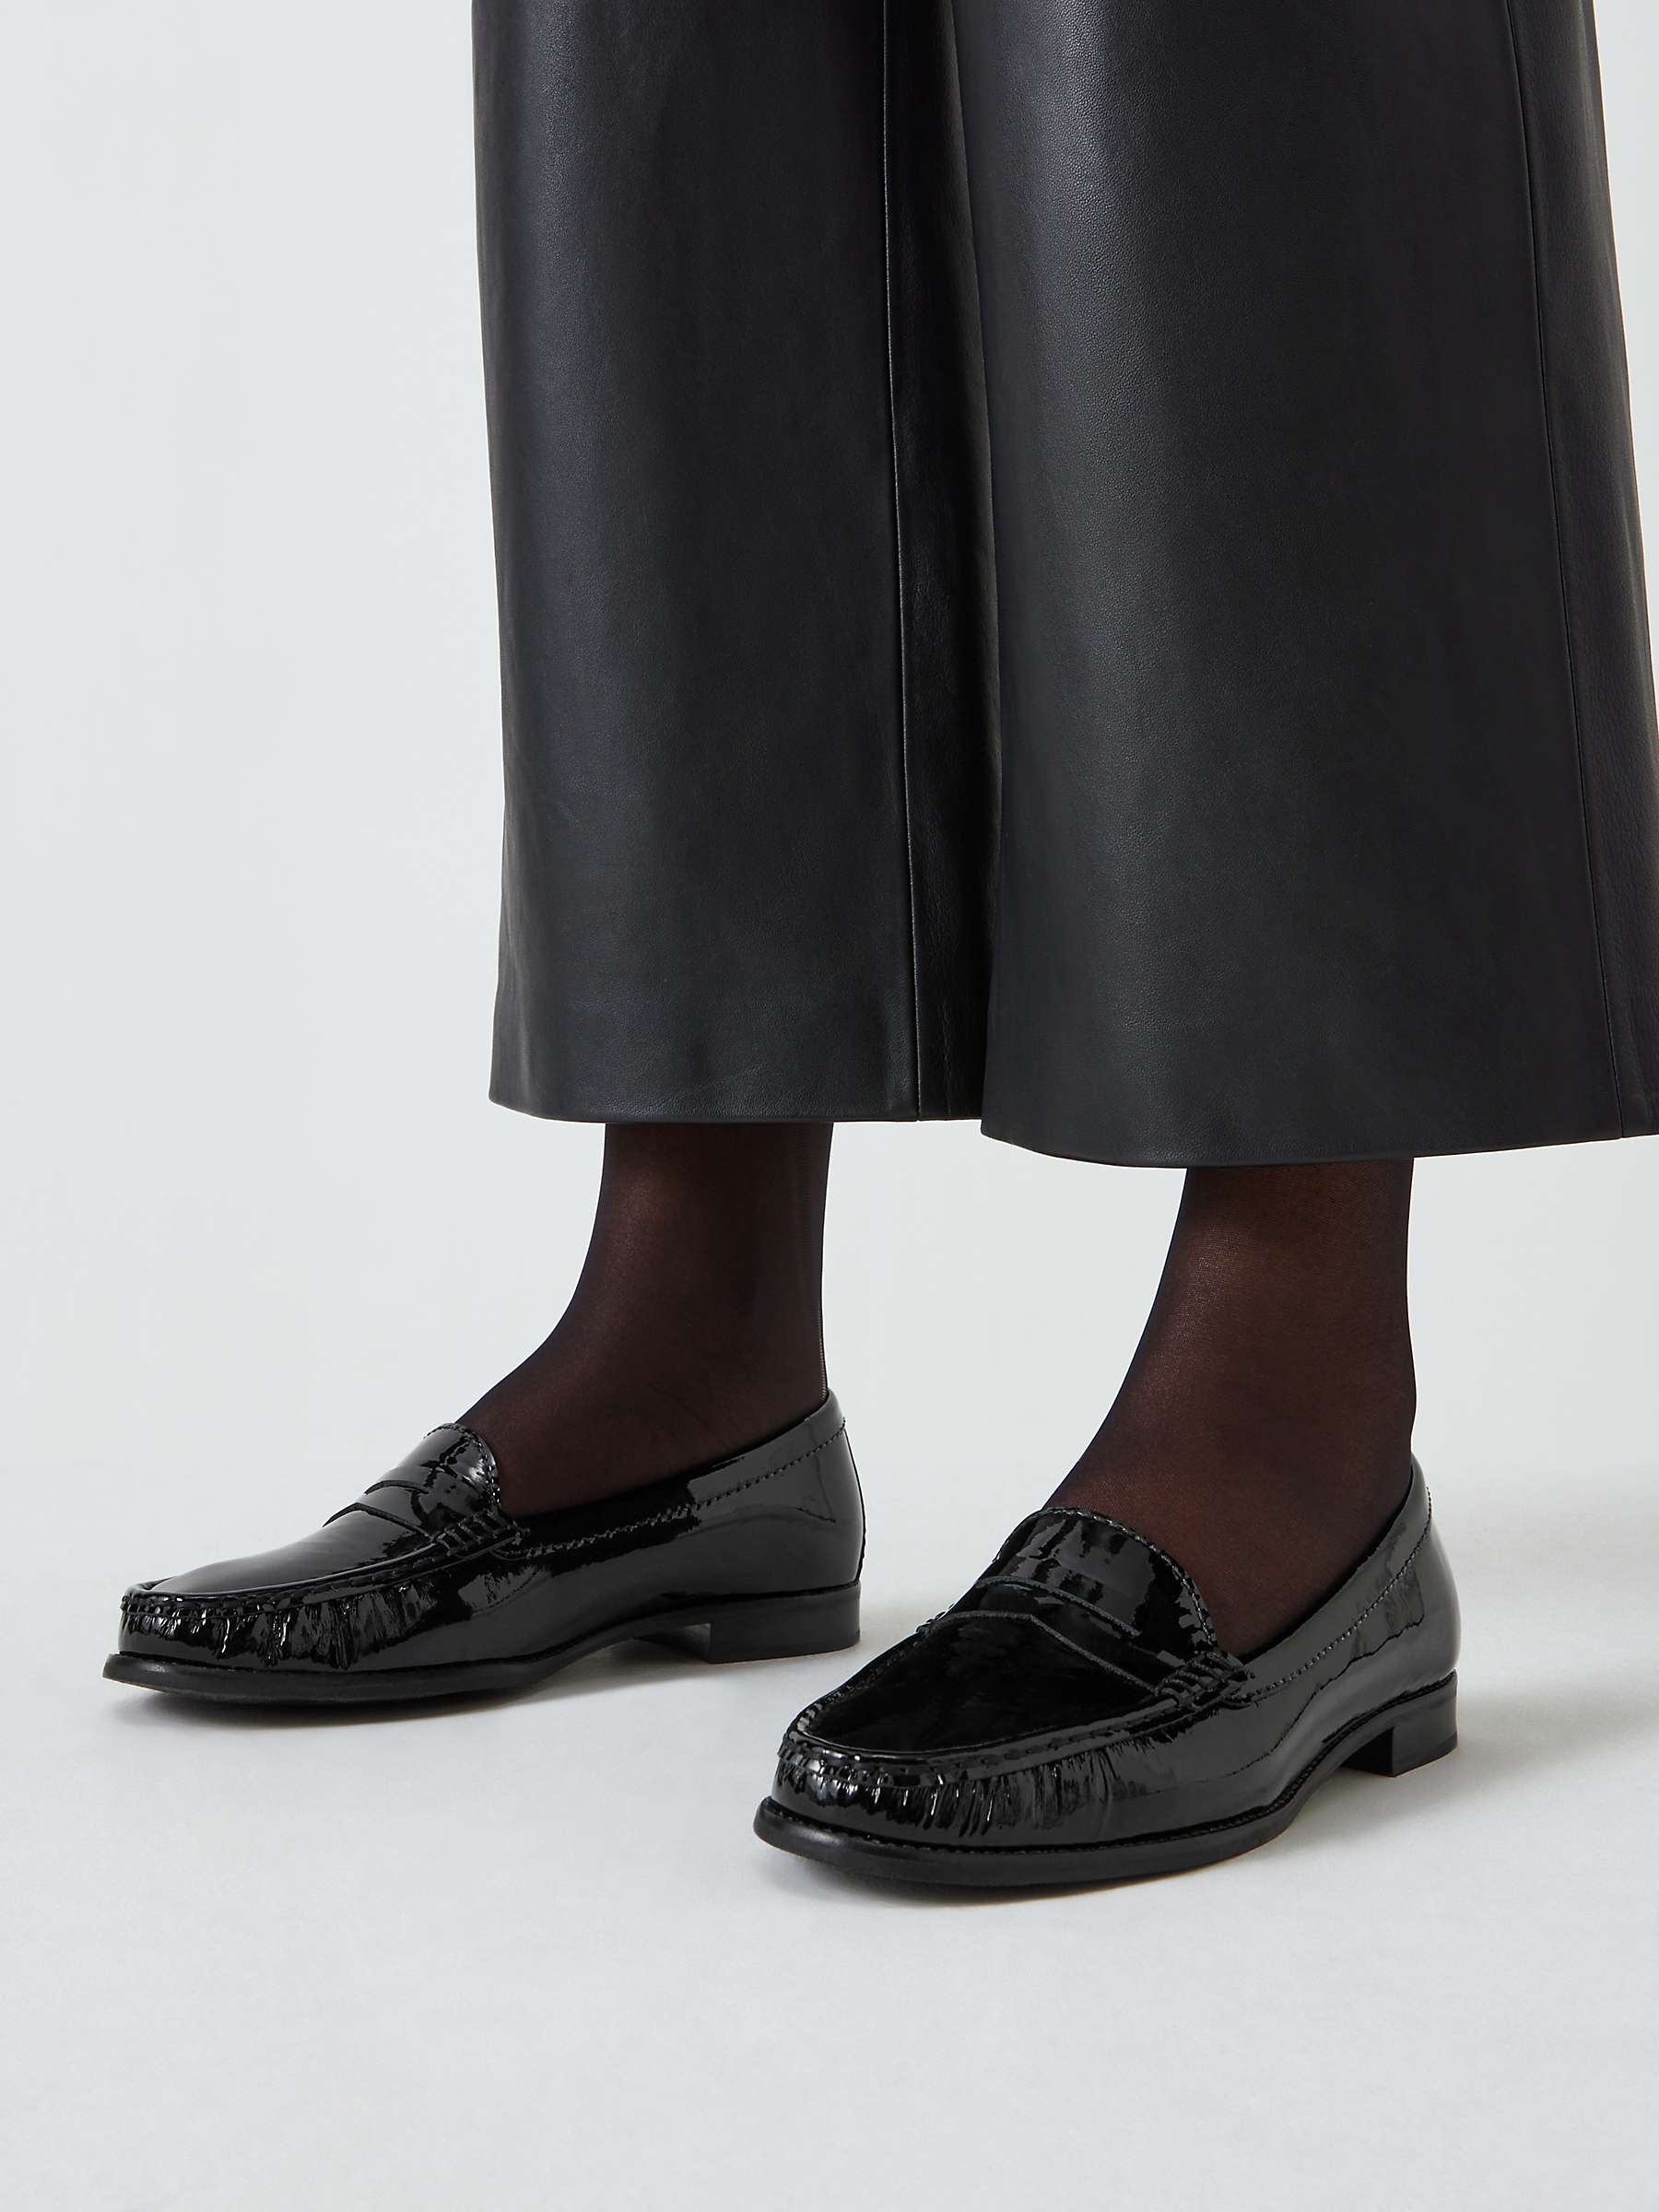 Buy John Lewis Pennie Patent Leather Loafers, Black Online at johnlewis.com